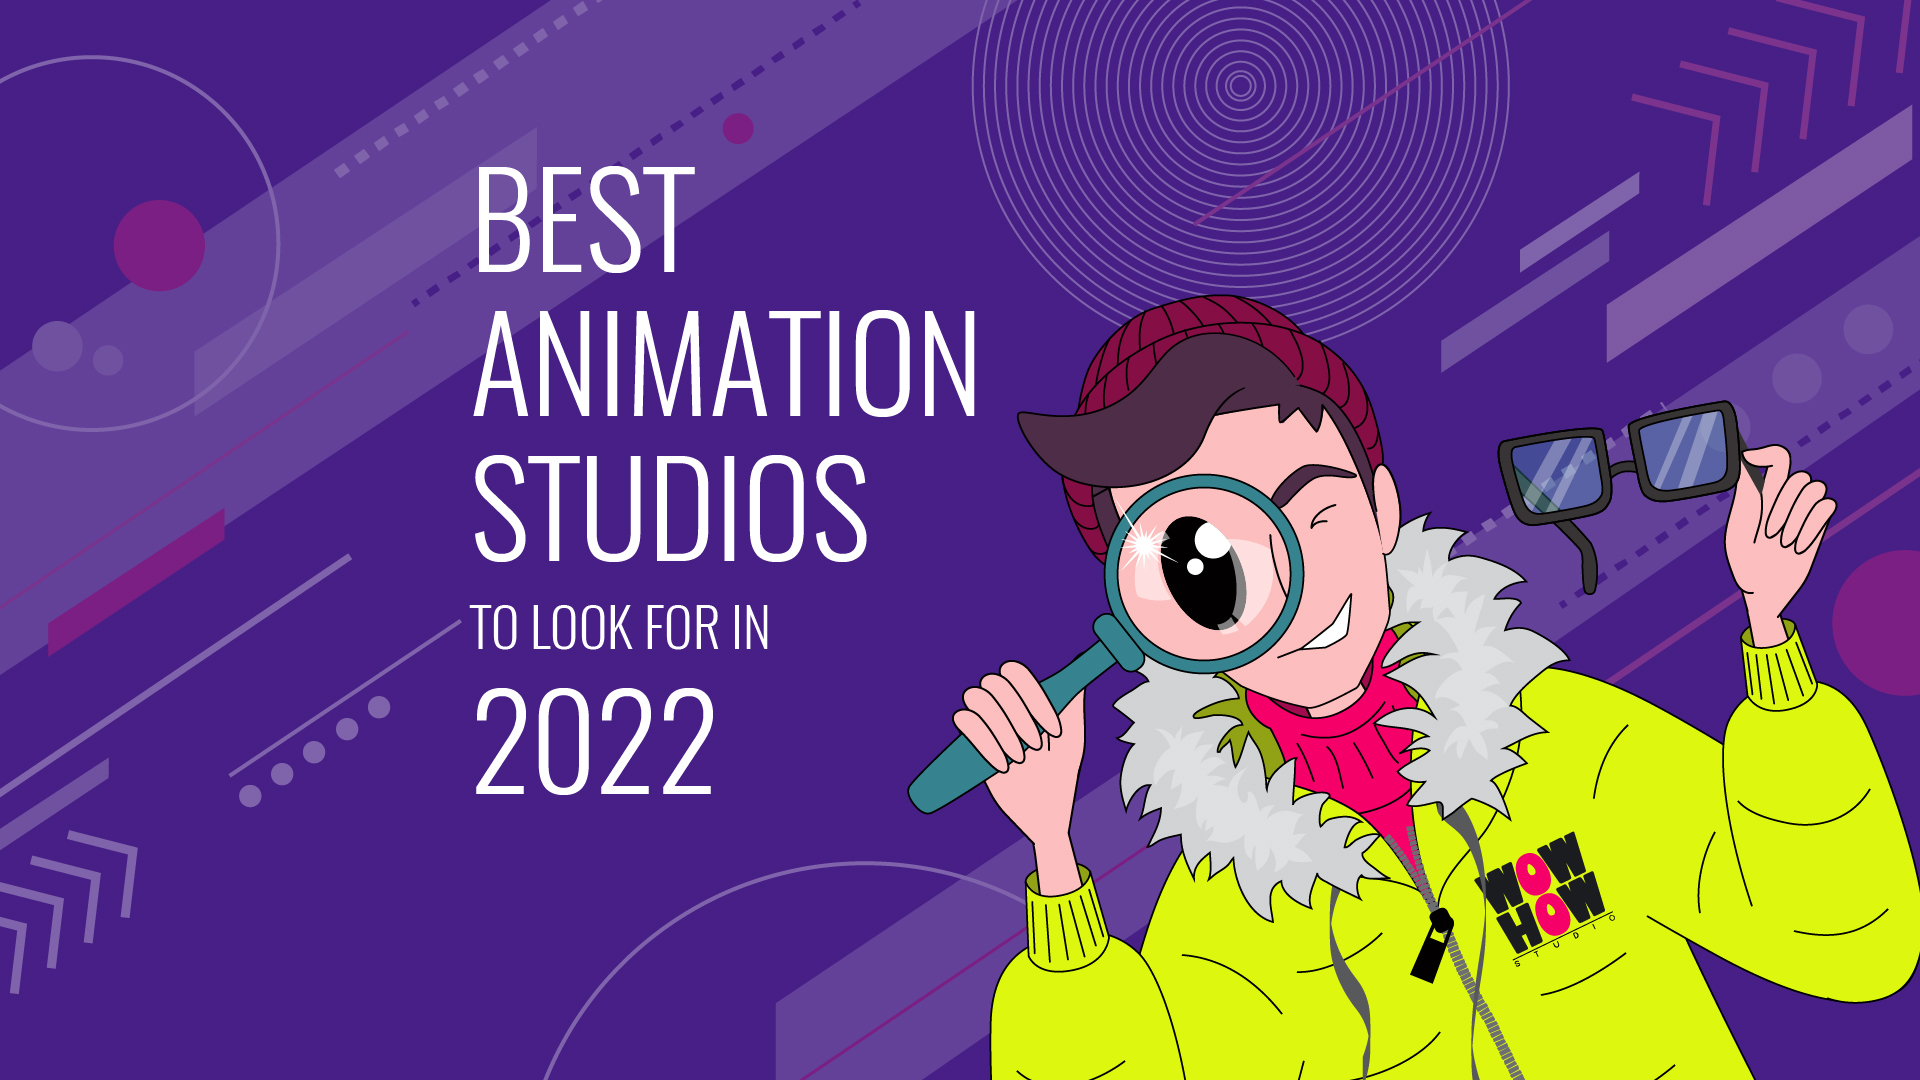 Best Animation Studios to Look For in 2022 - Wow-How Studio - Video  Production, 2D & 3D Animation